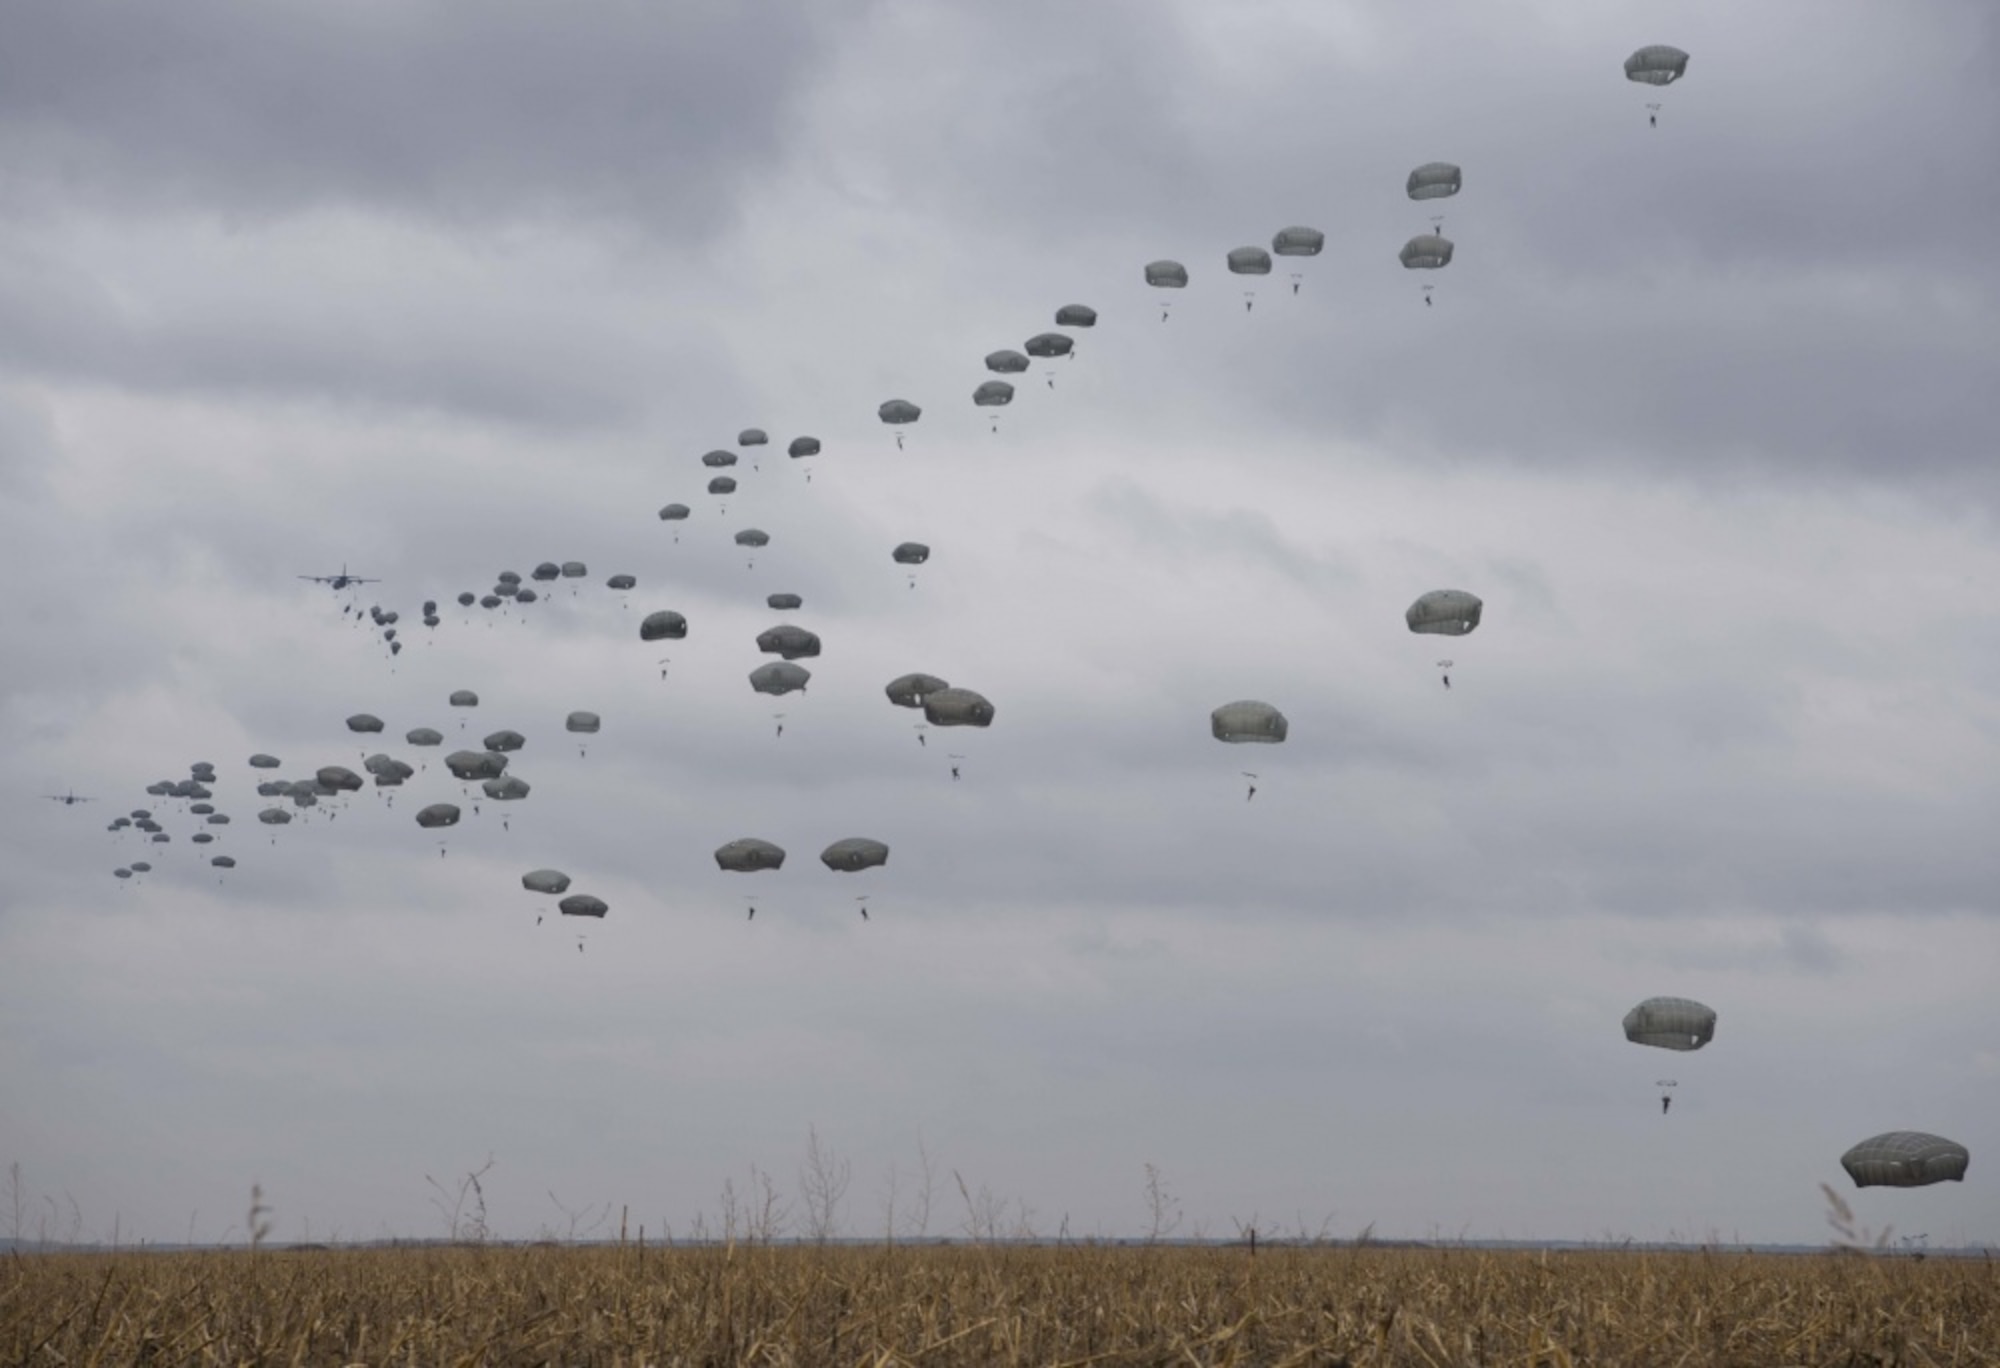 U.S. and Serbian paratroopers descend from the sky during Exercise Double Eagle 2017 in Kovin, Serbia on November 16, 2017. Exercise Double Eagle is a bi-lateral airborne insertion exercise designed to allow U.S. and Serbian forces to work together in areas of mutual interest in securing regional security and peace. (U.S. Air Force photo by Senior Airman Elizabeth Baker)